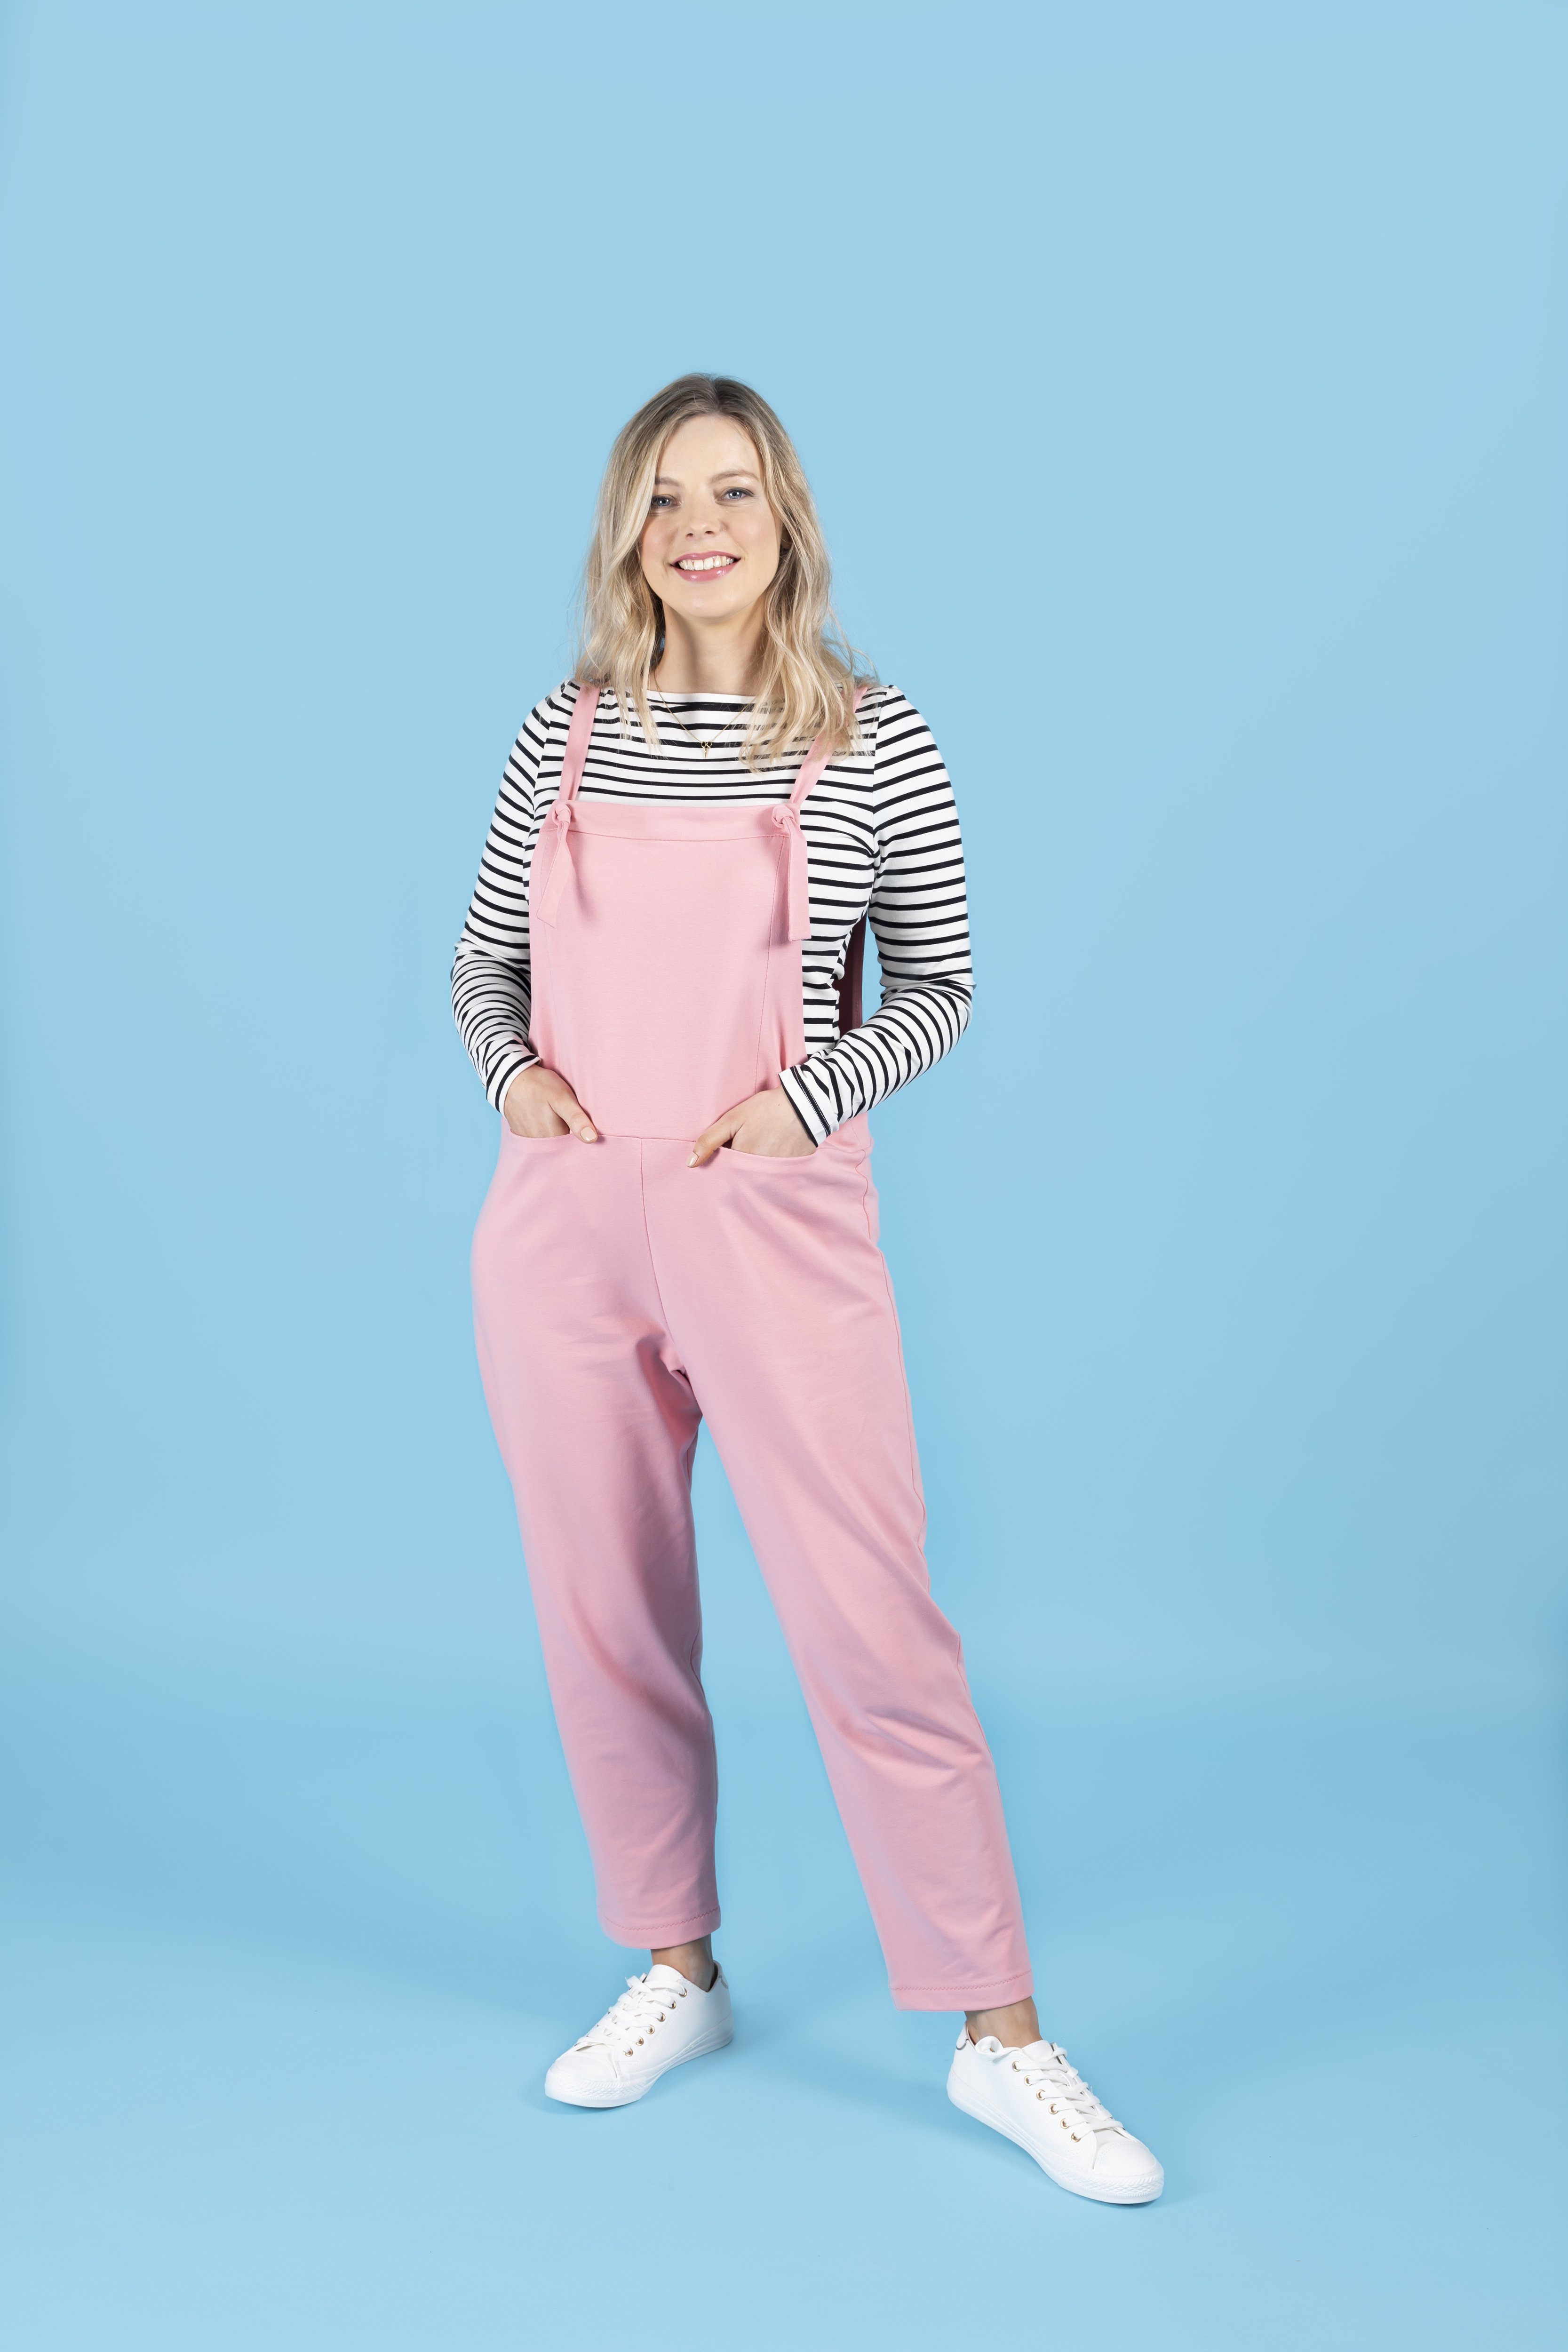 Sew Dungarees - Erin by Tilly and the Buttons